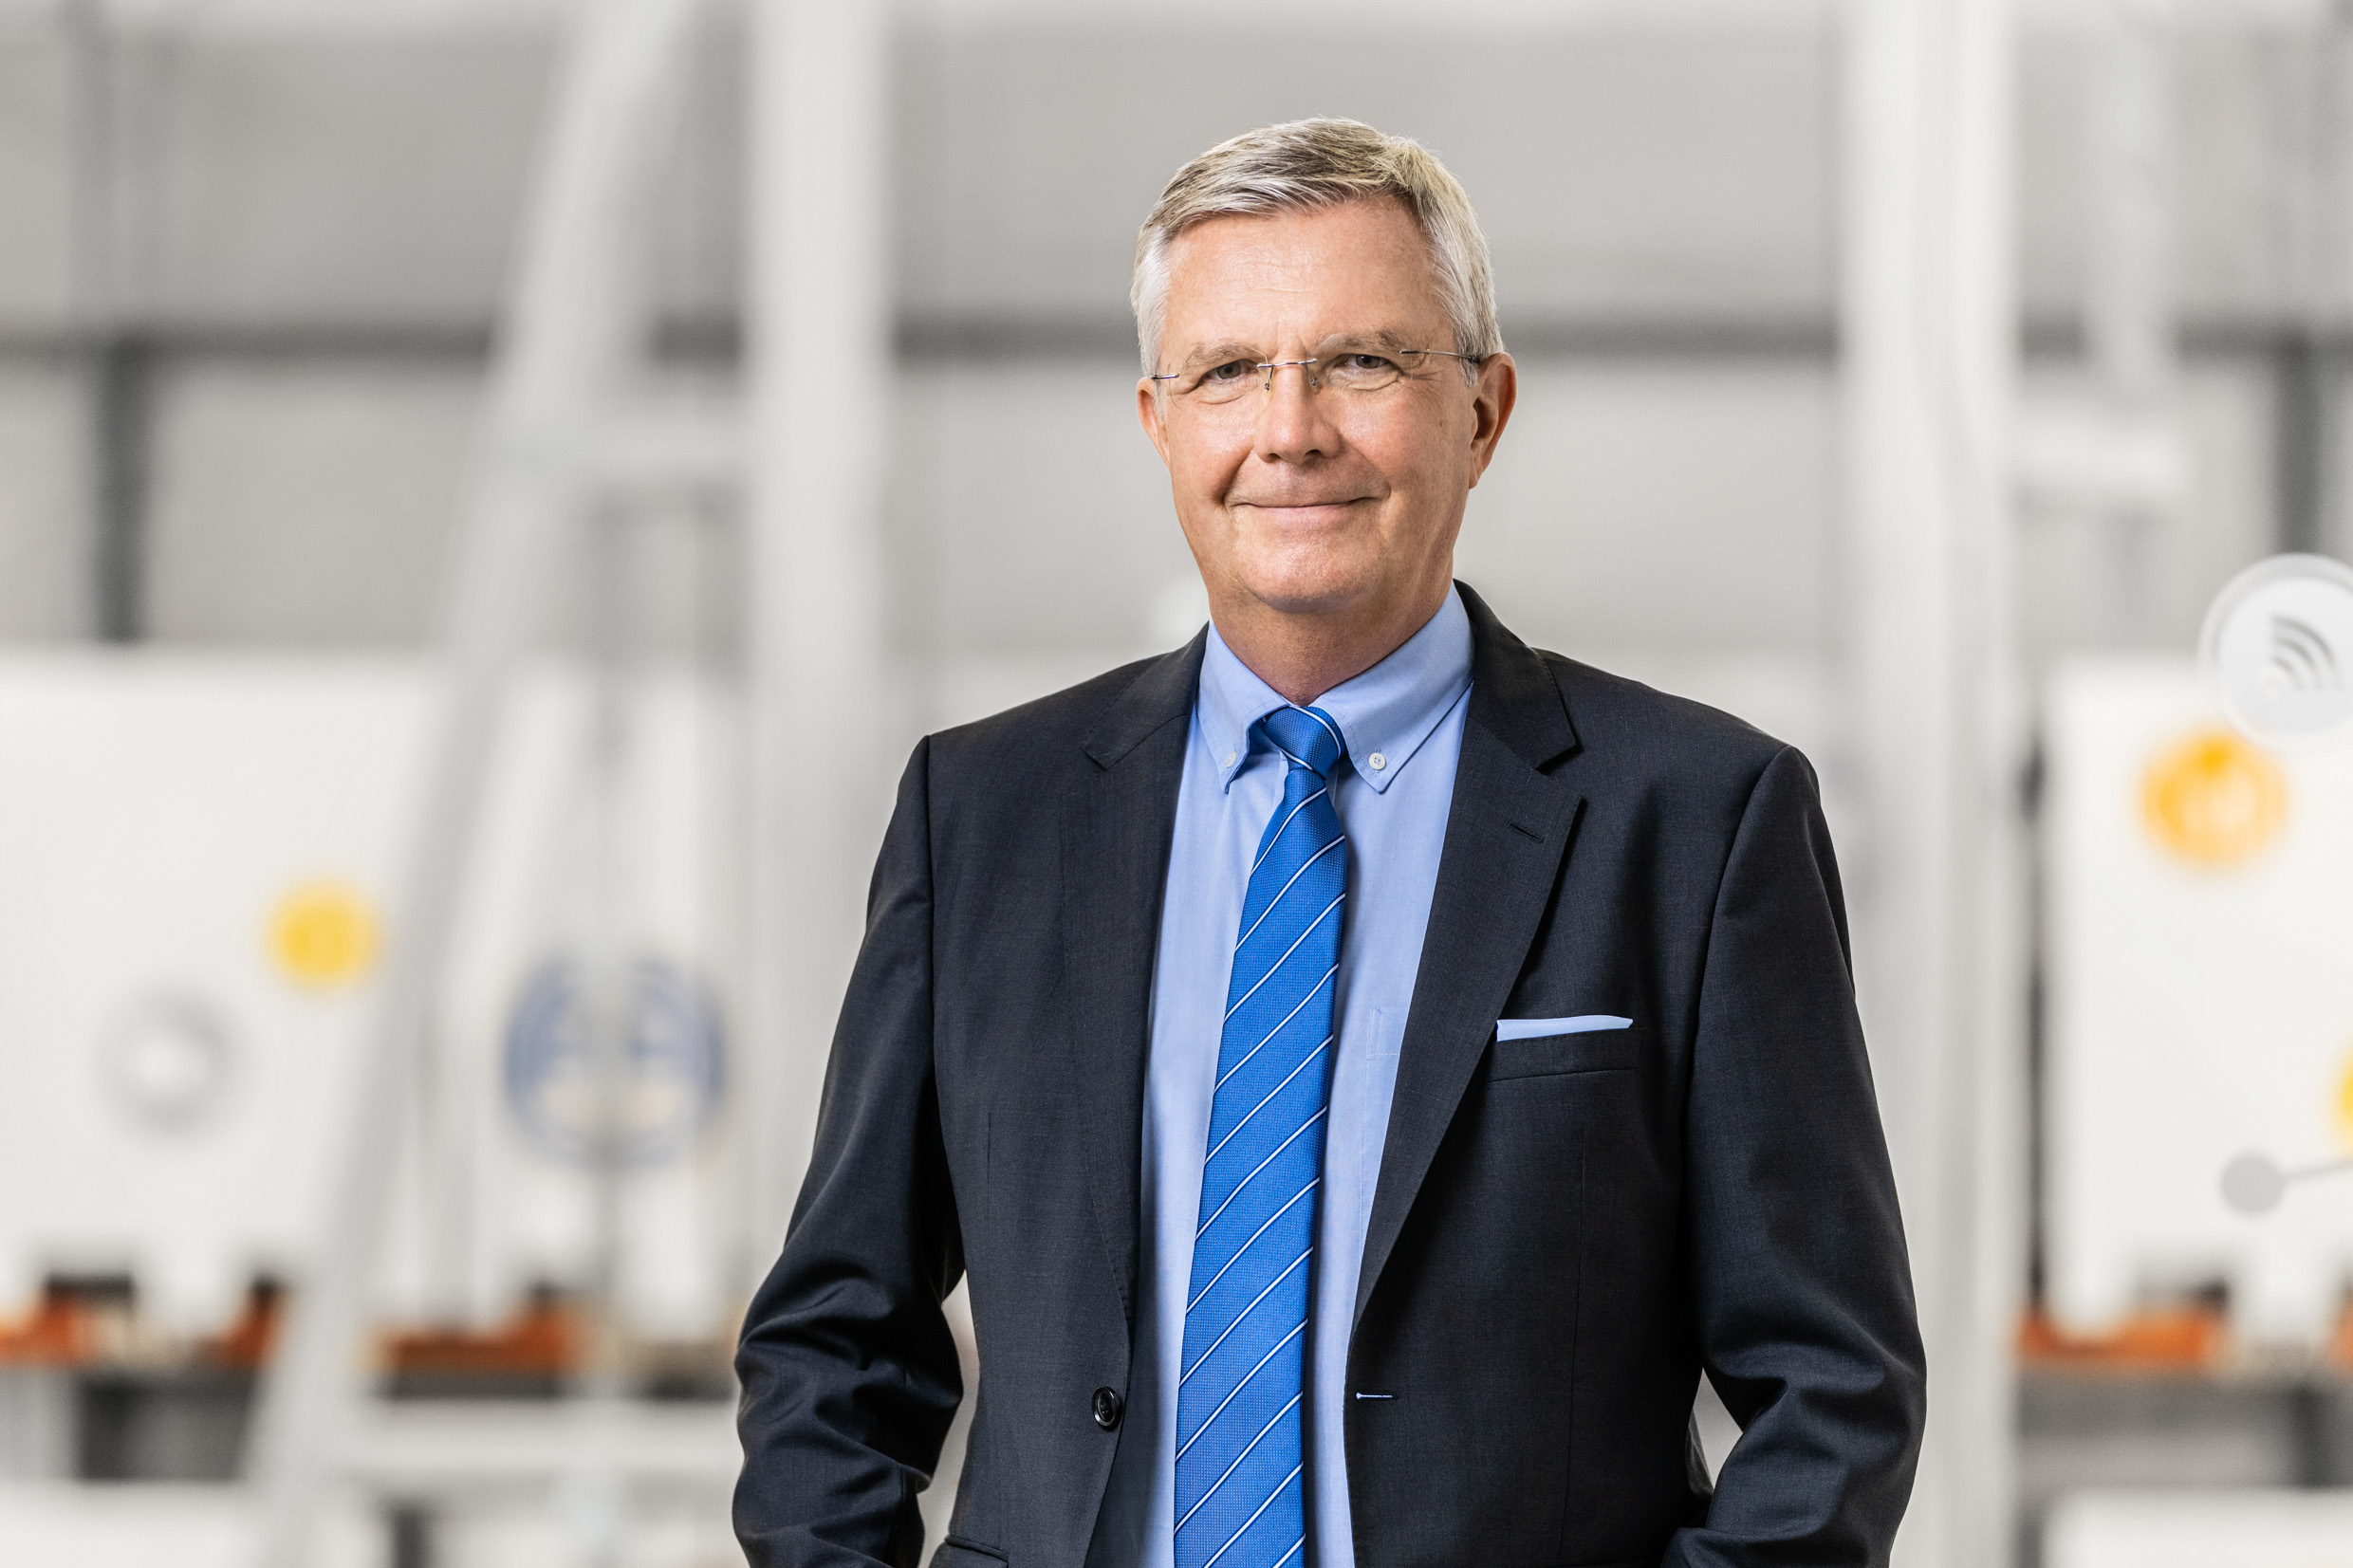 Managing Director of Fraunhofer Institute for Material Flow and Logistics IML